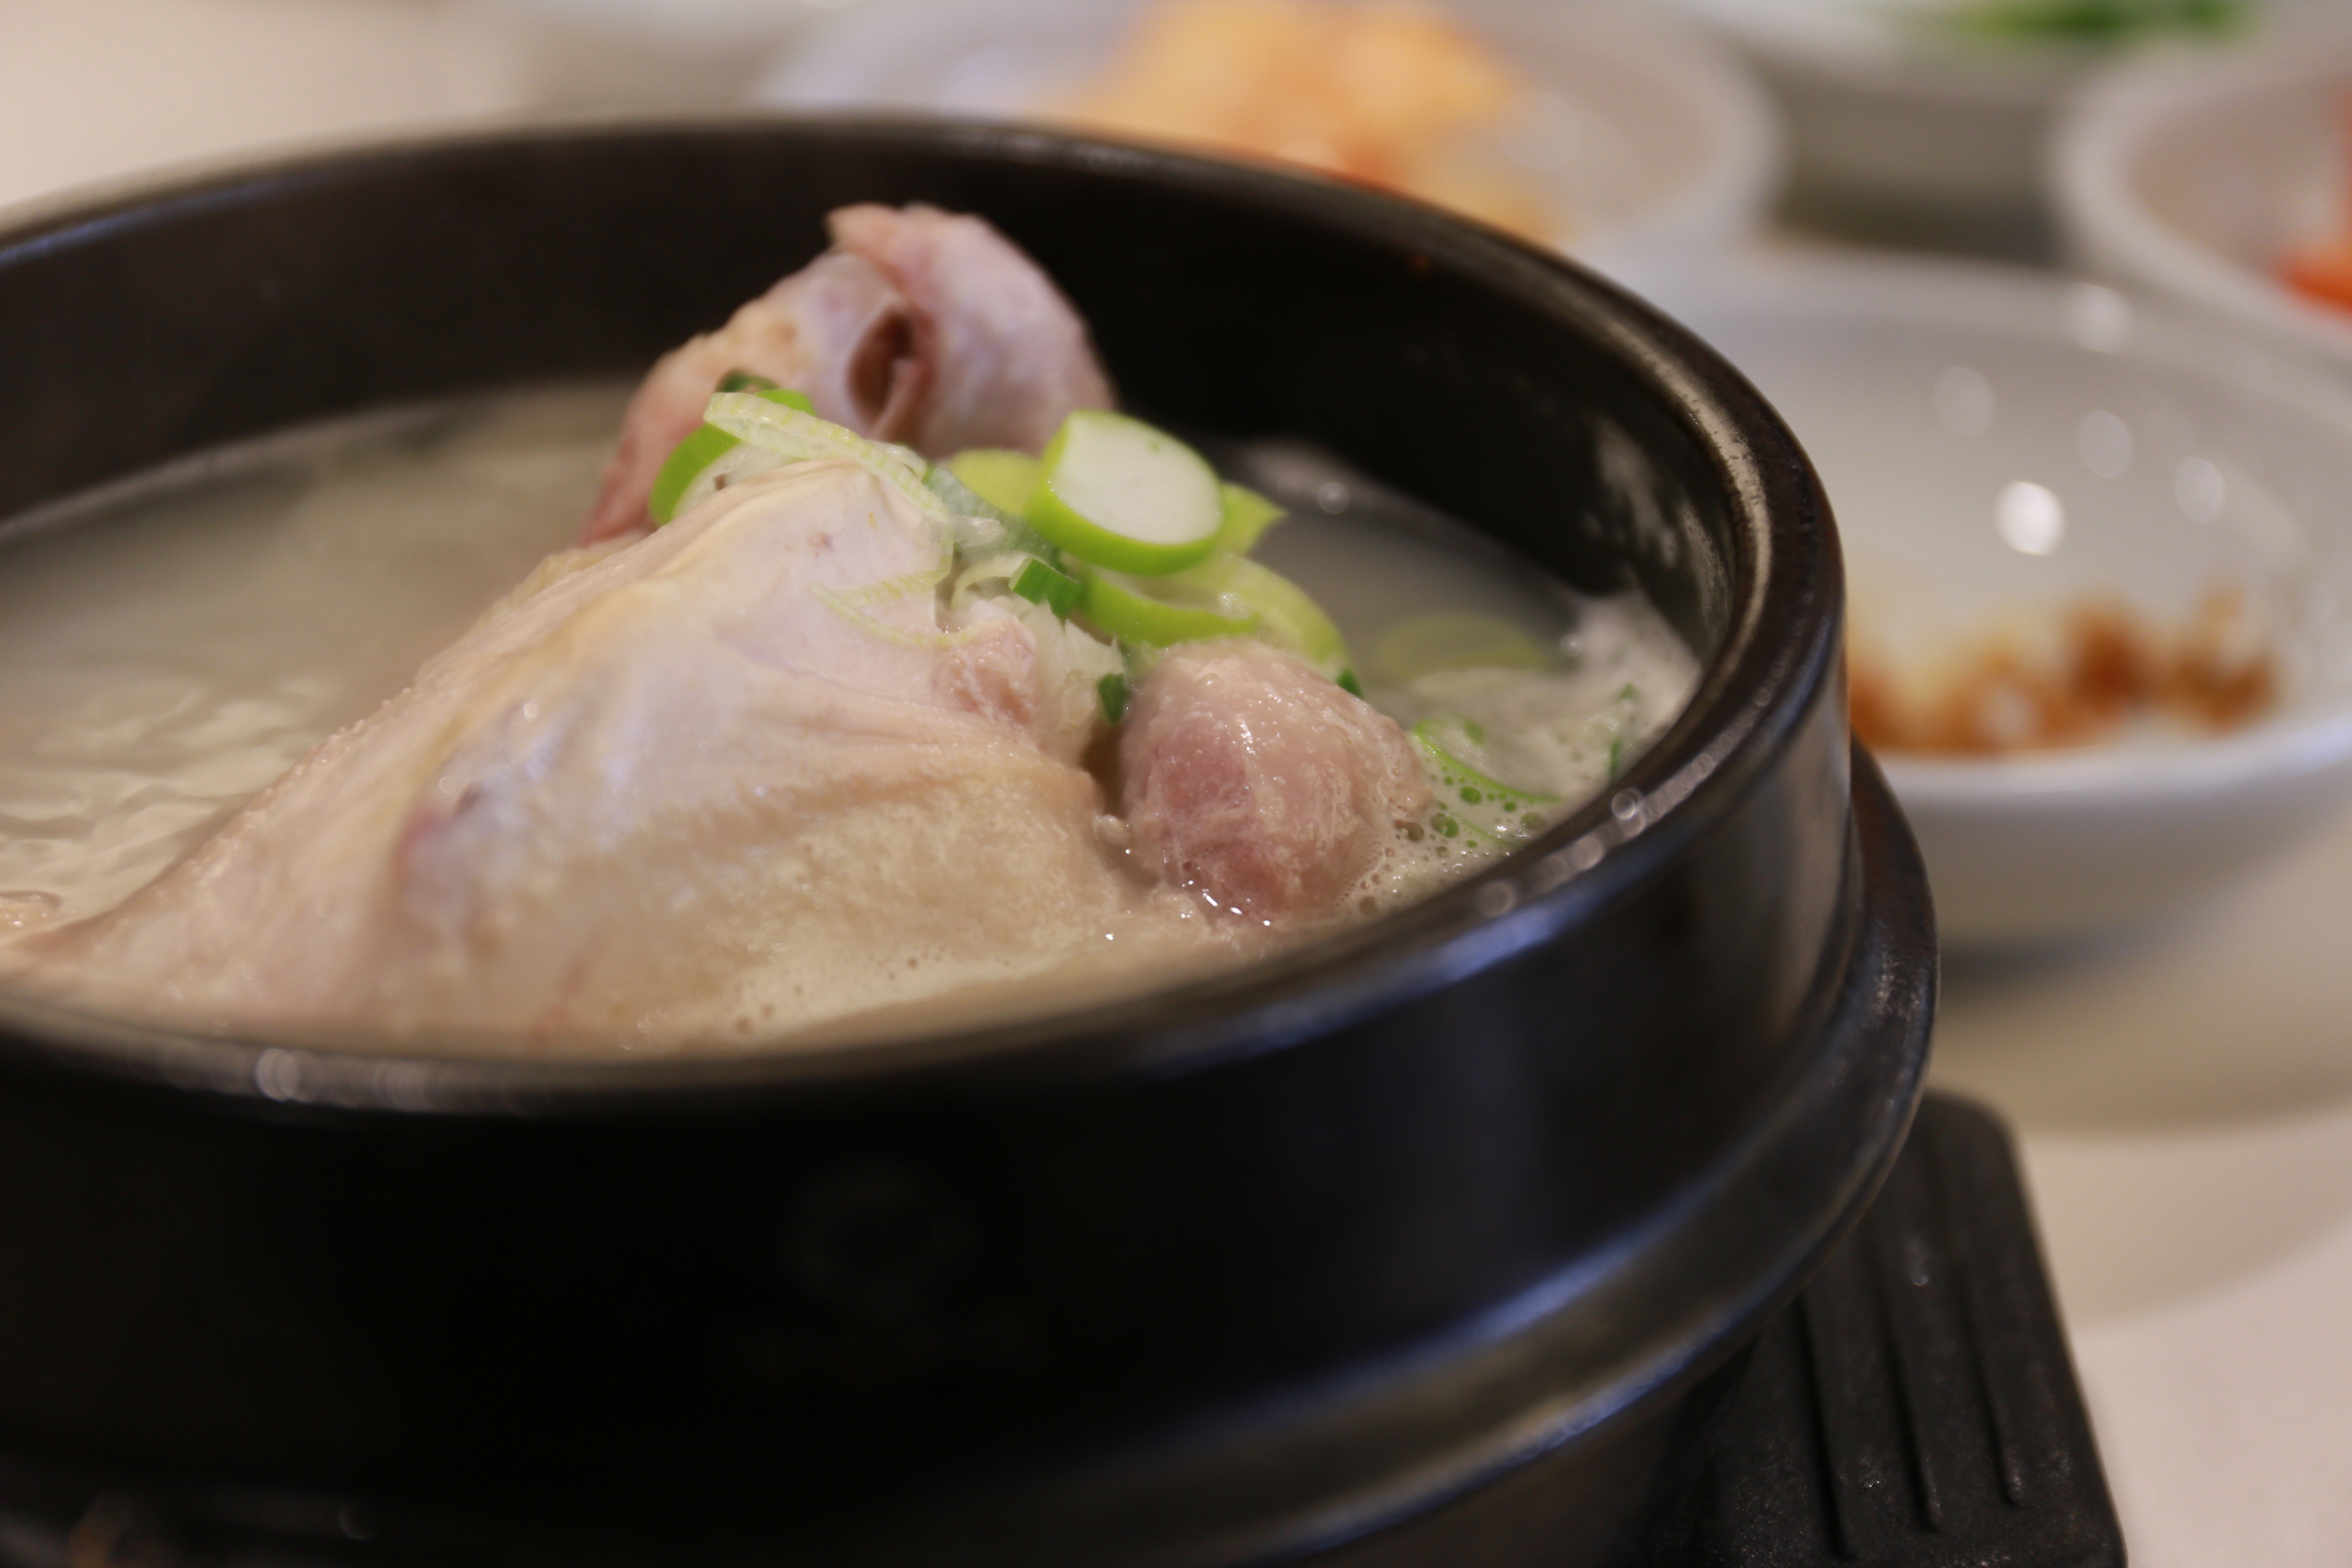 Traditional Korean Food to Try While in Seoul | TiptoeingWorld